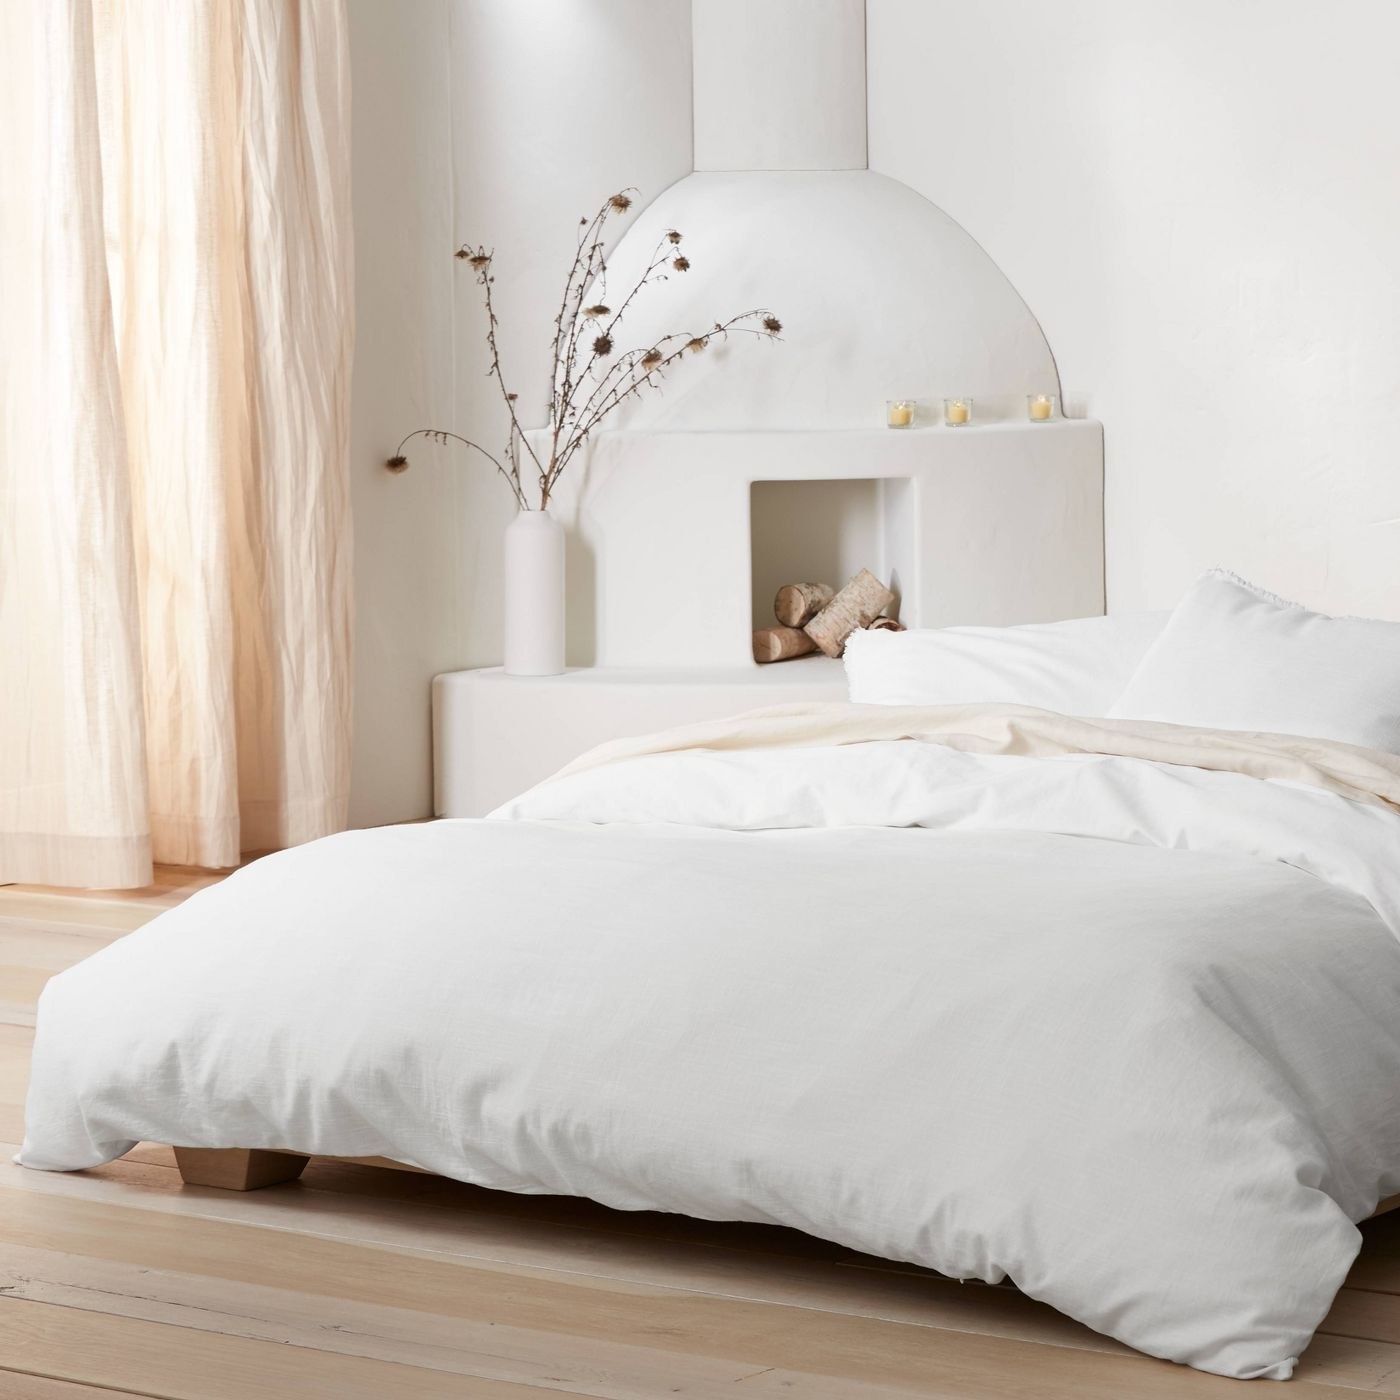 white linen duvet cover and pillow shams on a bed